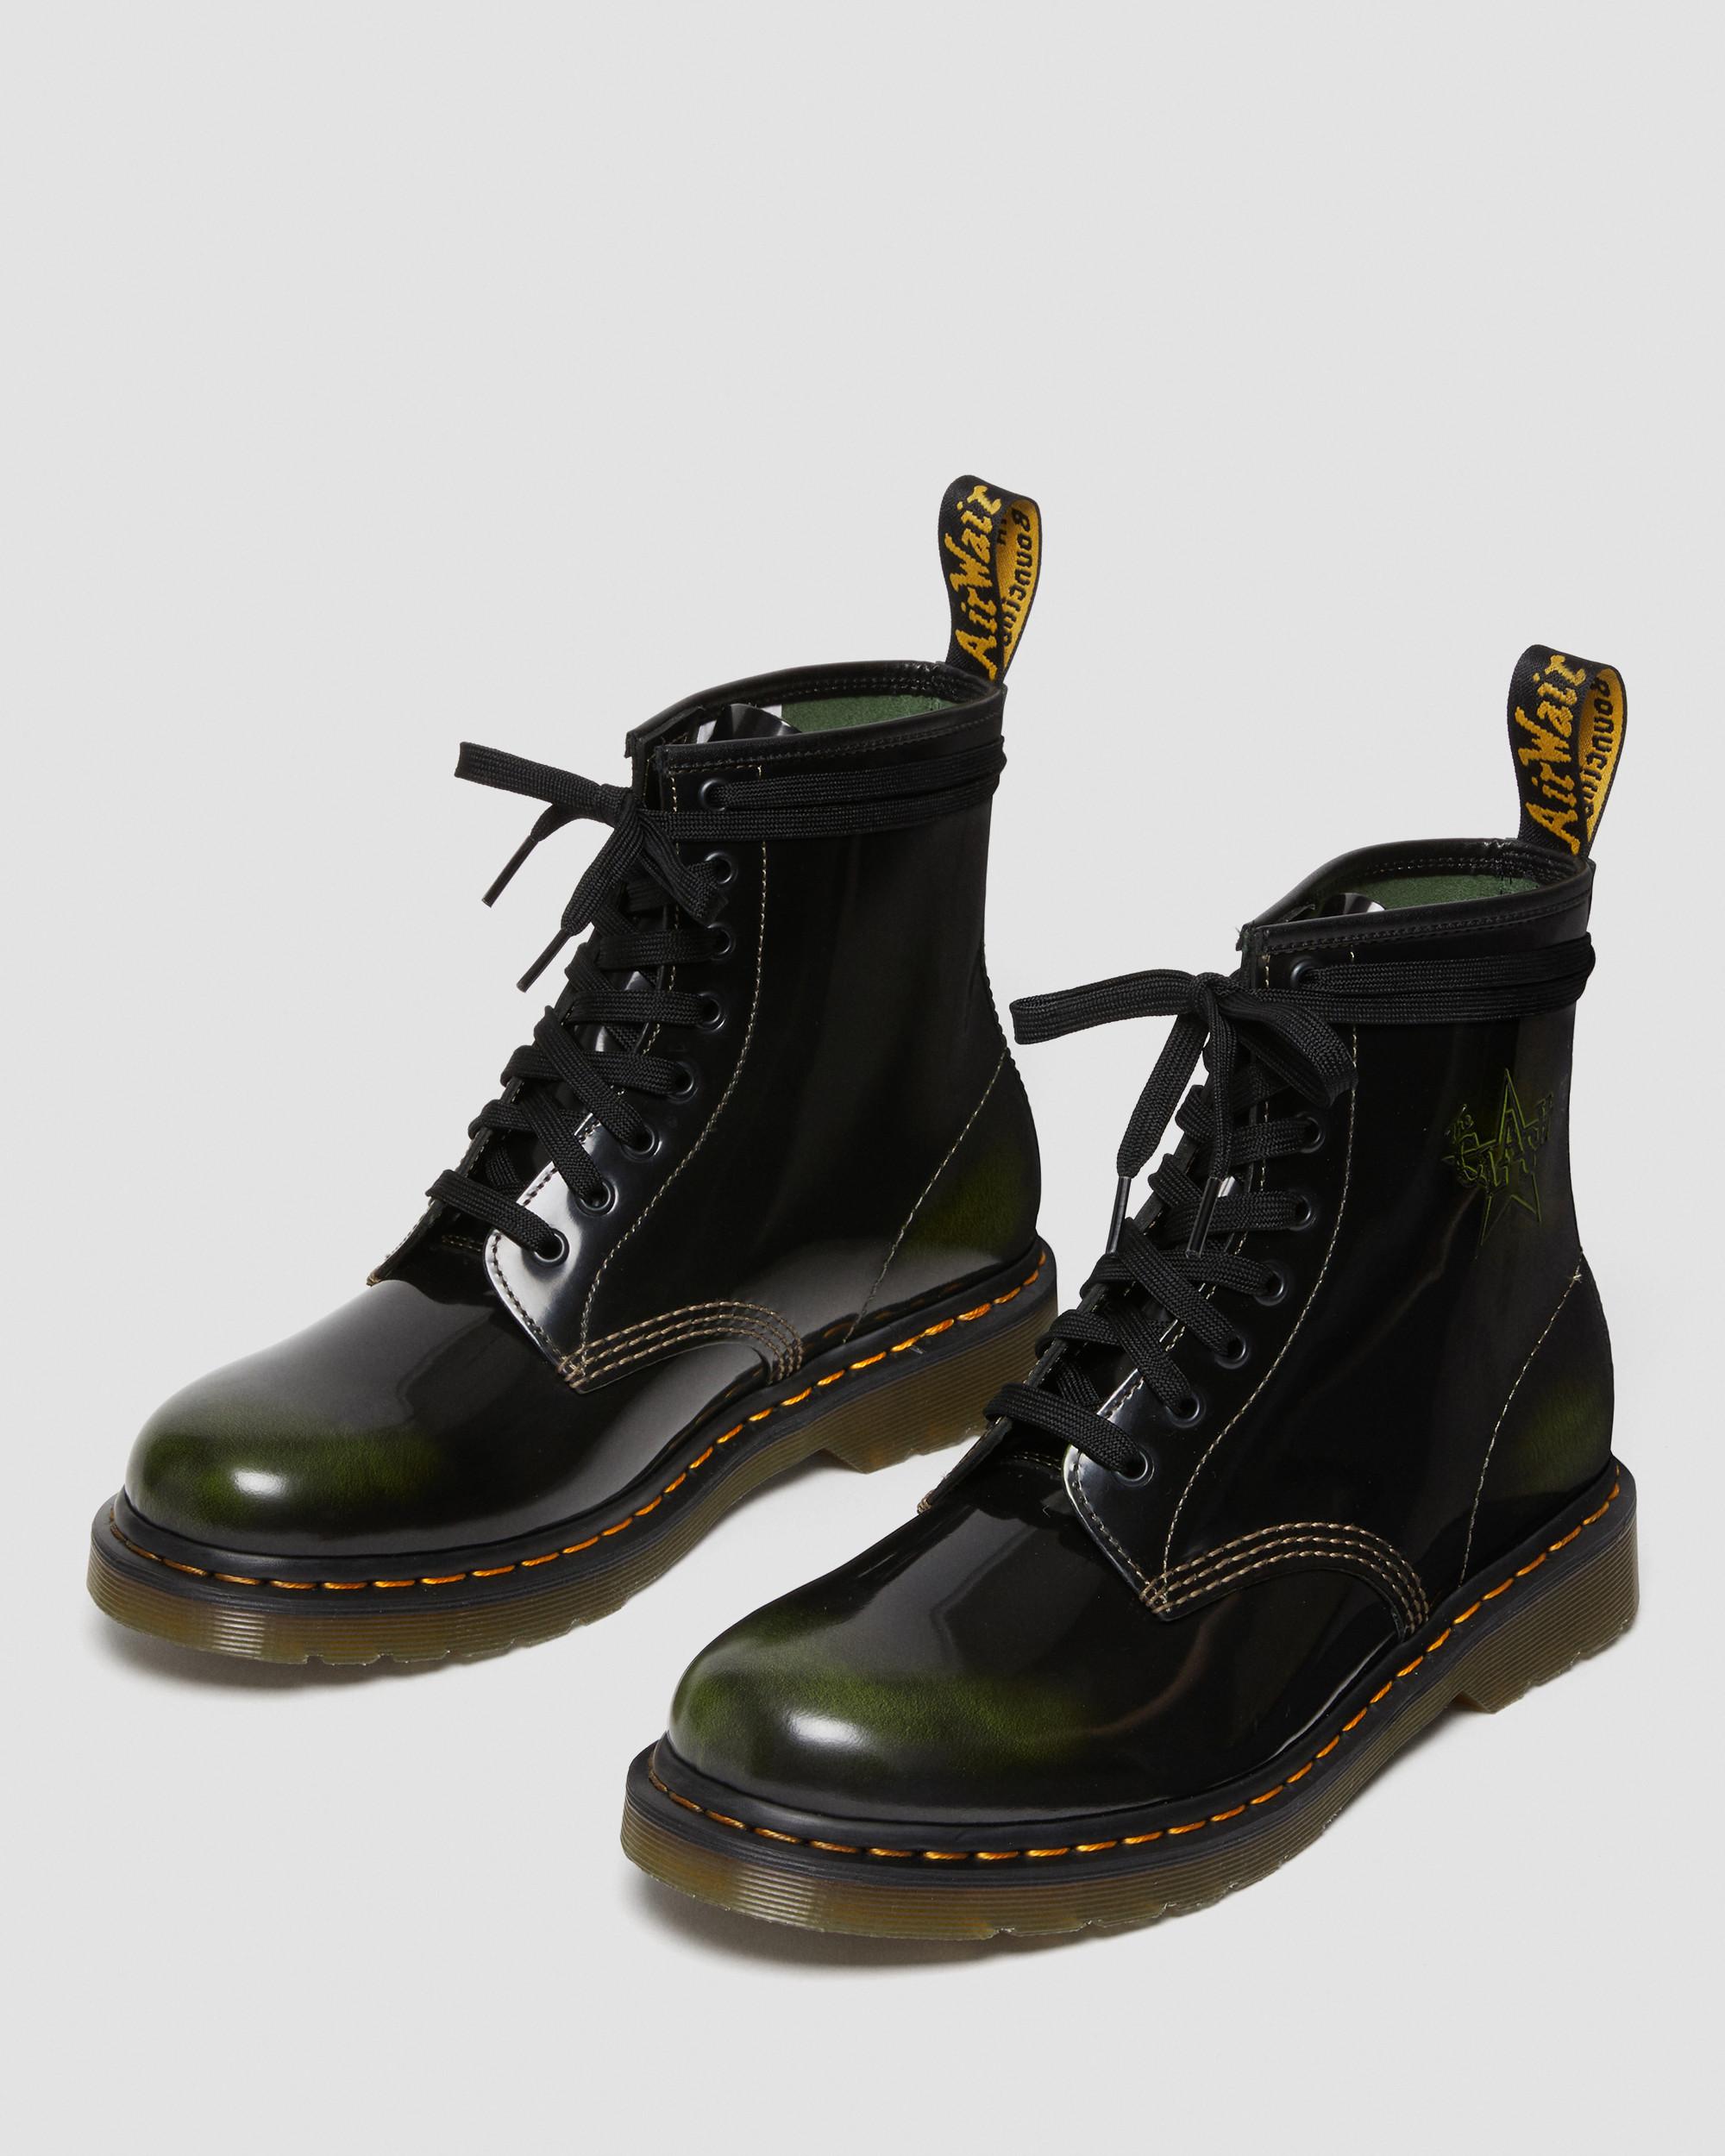 1460 THE CLASH Arcadia Leather Boots1460 THE CLASH Arcadia Leather Boots Dr. Martens